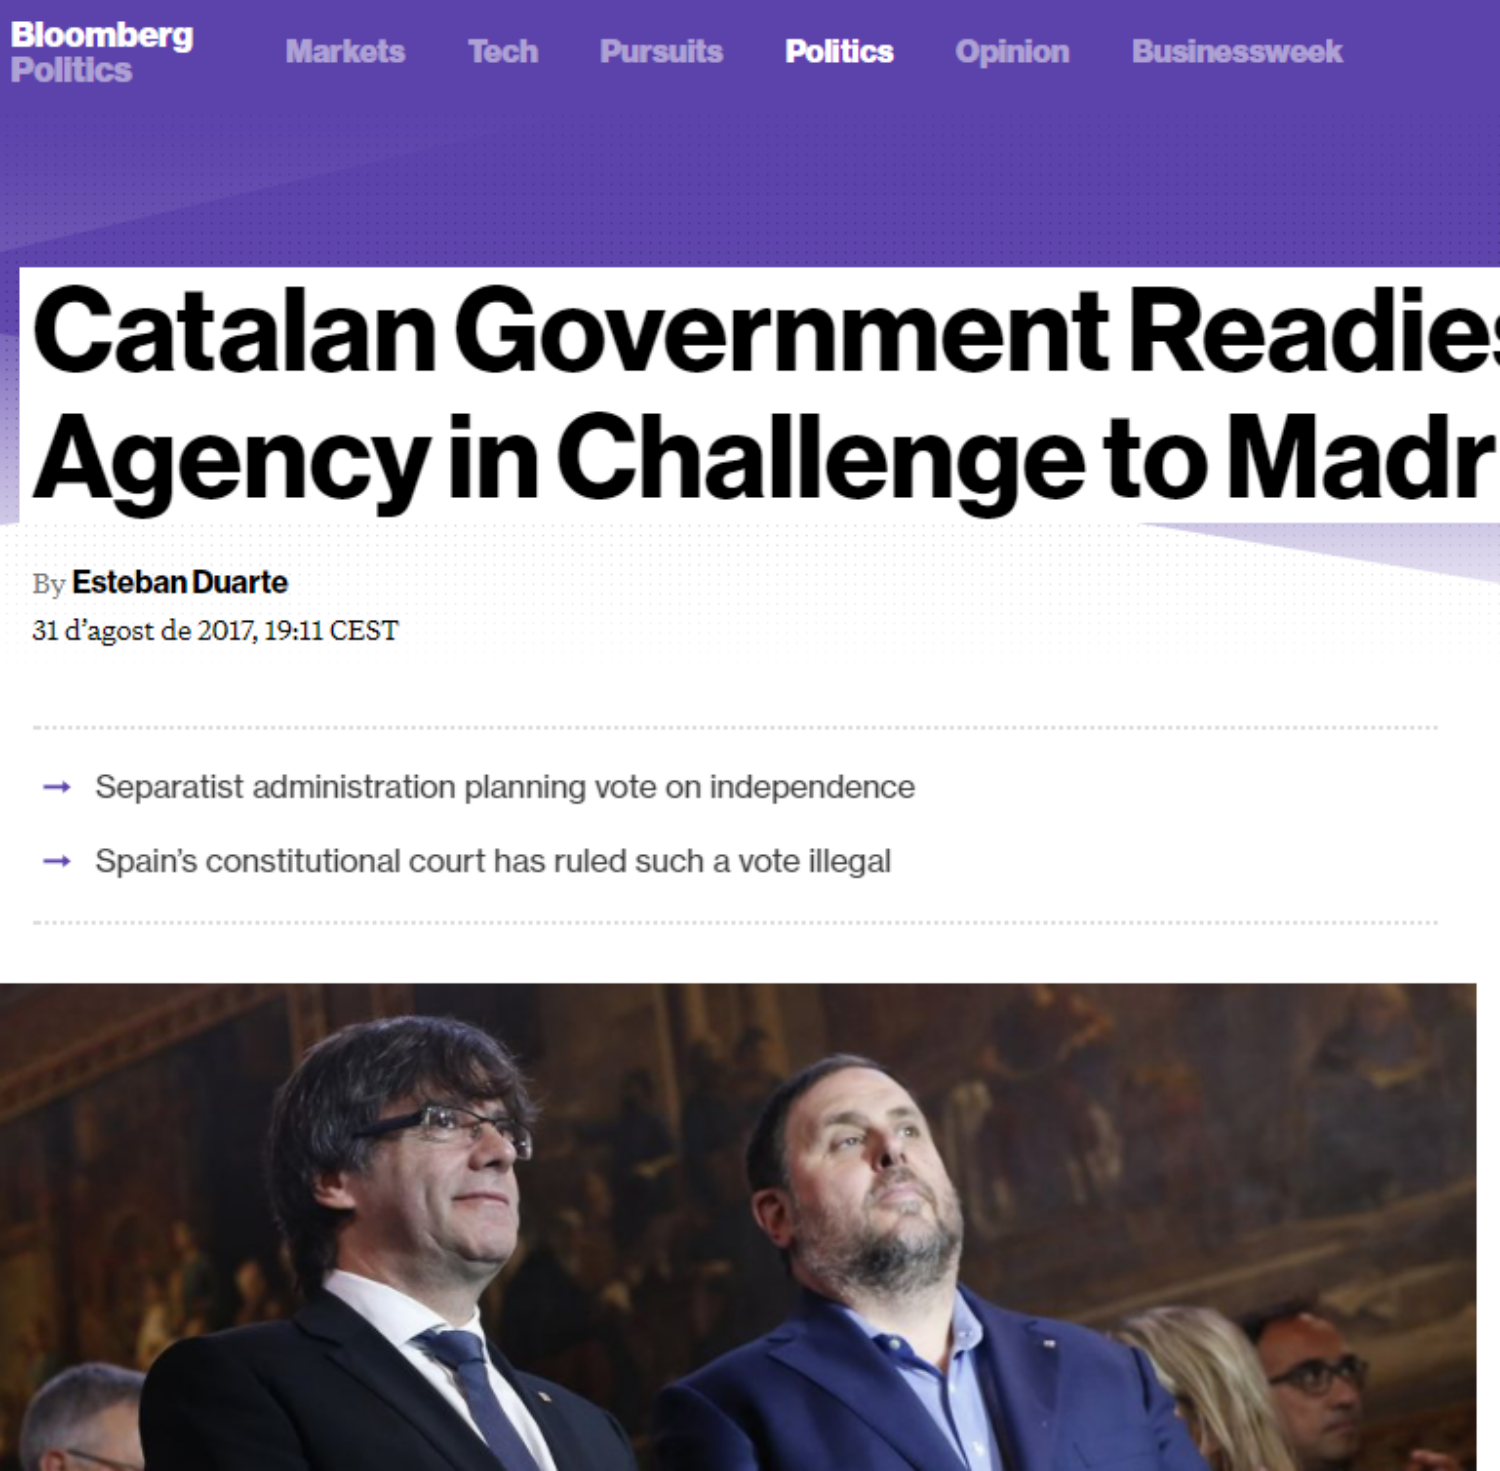 Bloomberg reports on "readying" of Catalan Tax Agency